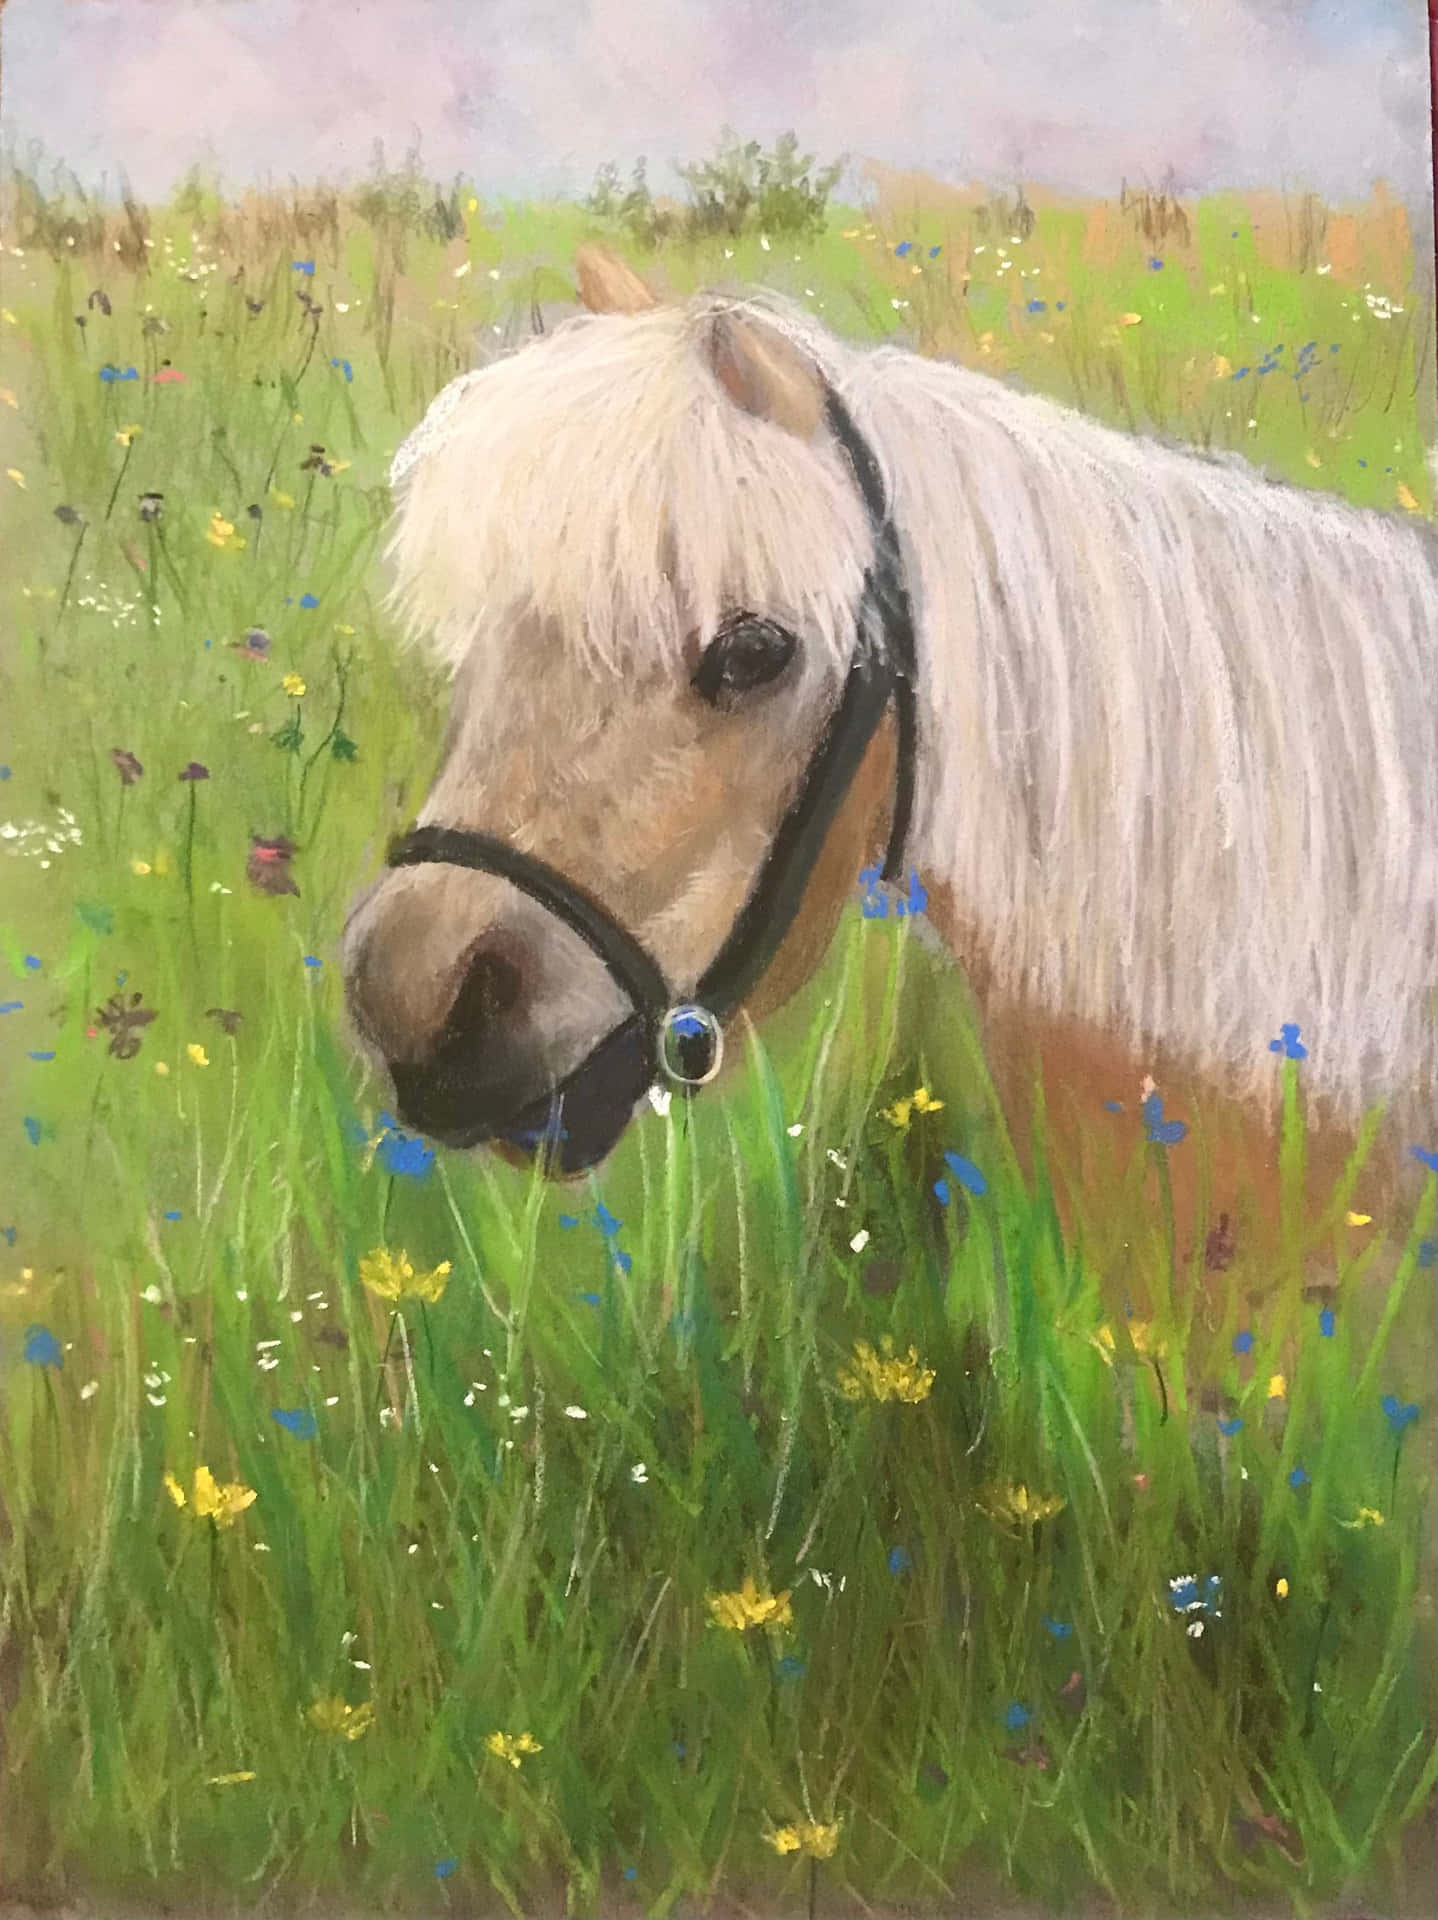 A beautiful pony lounging in a meadow on a sunny day